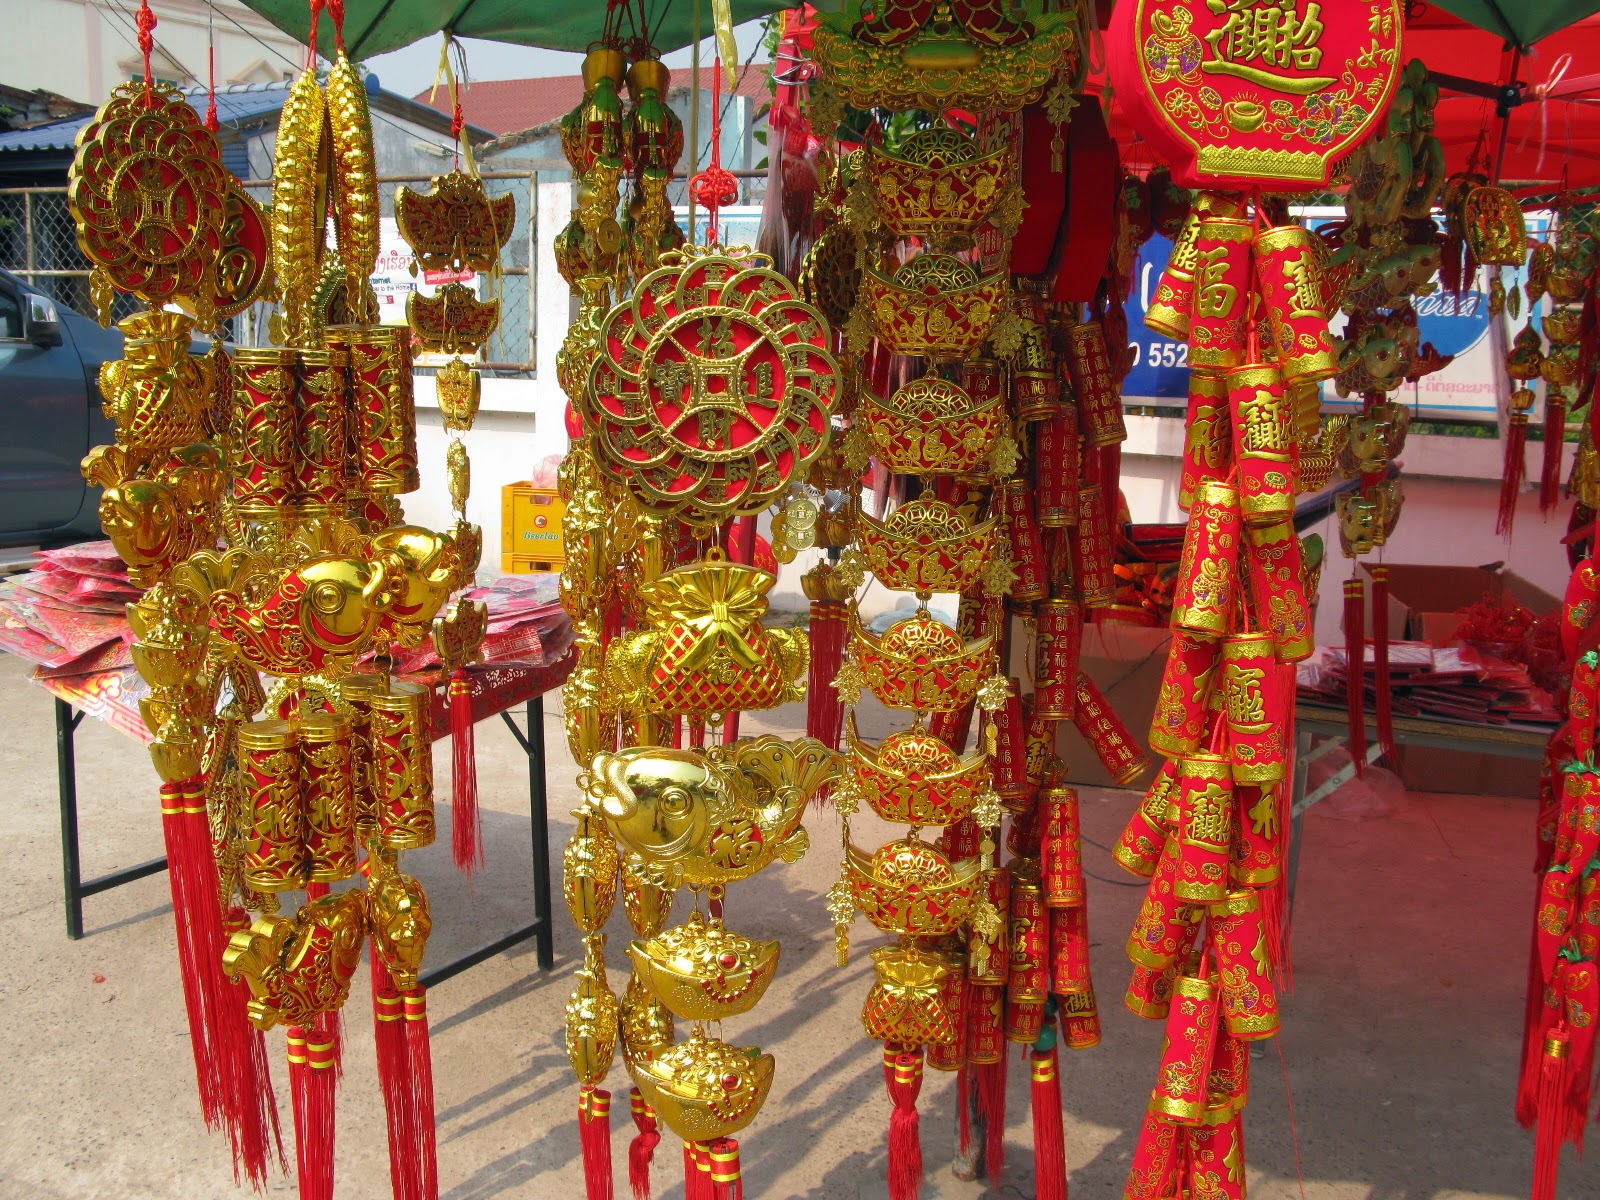 It seemed all SE Asia was gearing up for Chinese New Year